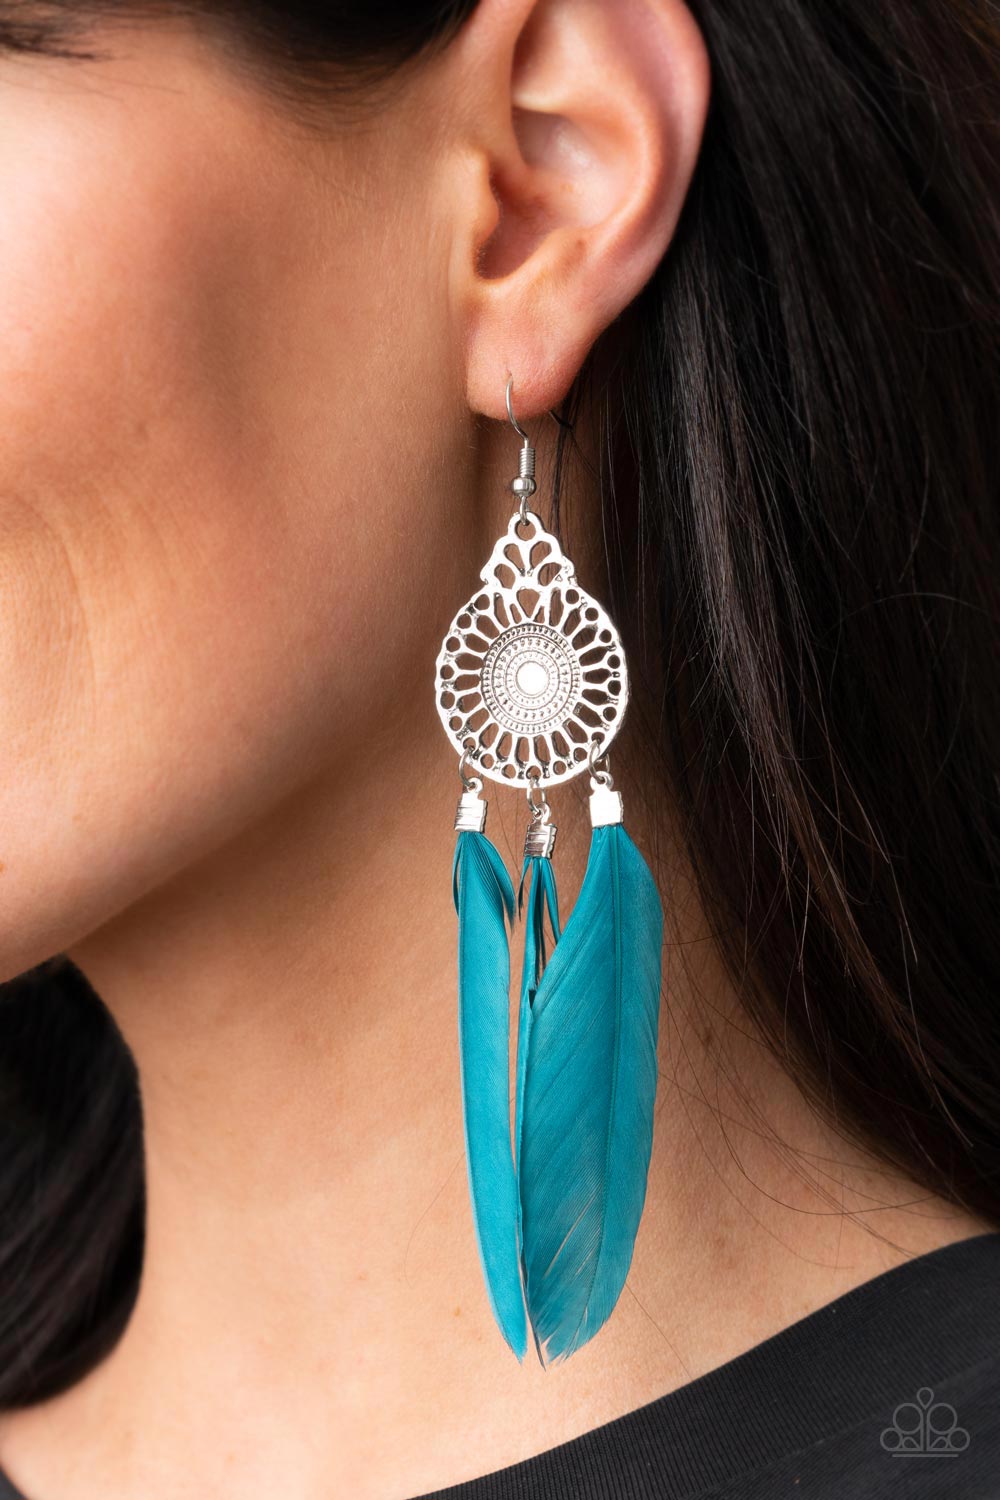 Pretty in PLUMES Blue Feather Earrings - Paparazzi Accessories-on model - CarasShop.com - $5 Jewelry by Cara Jewels